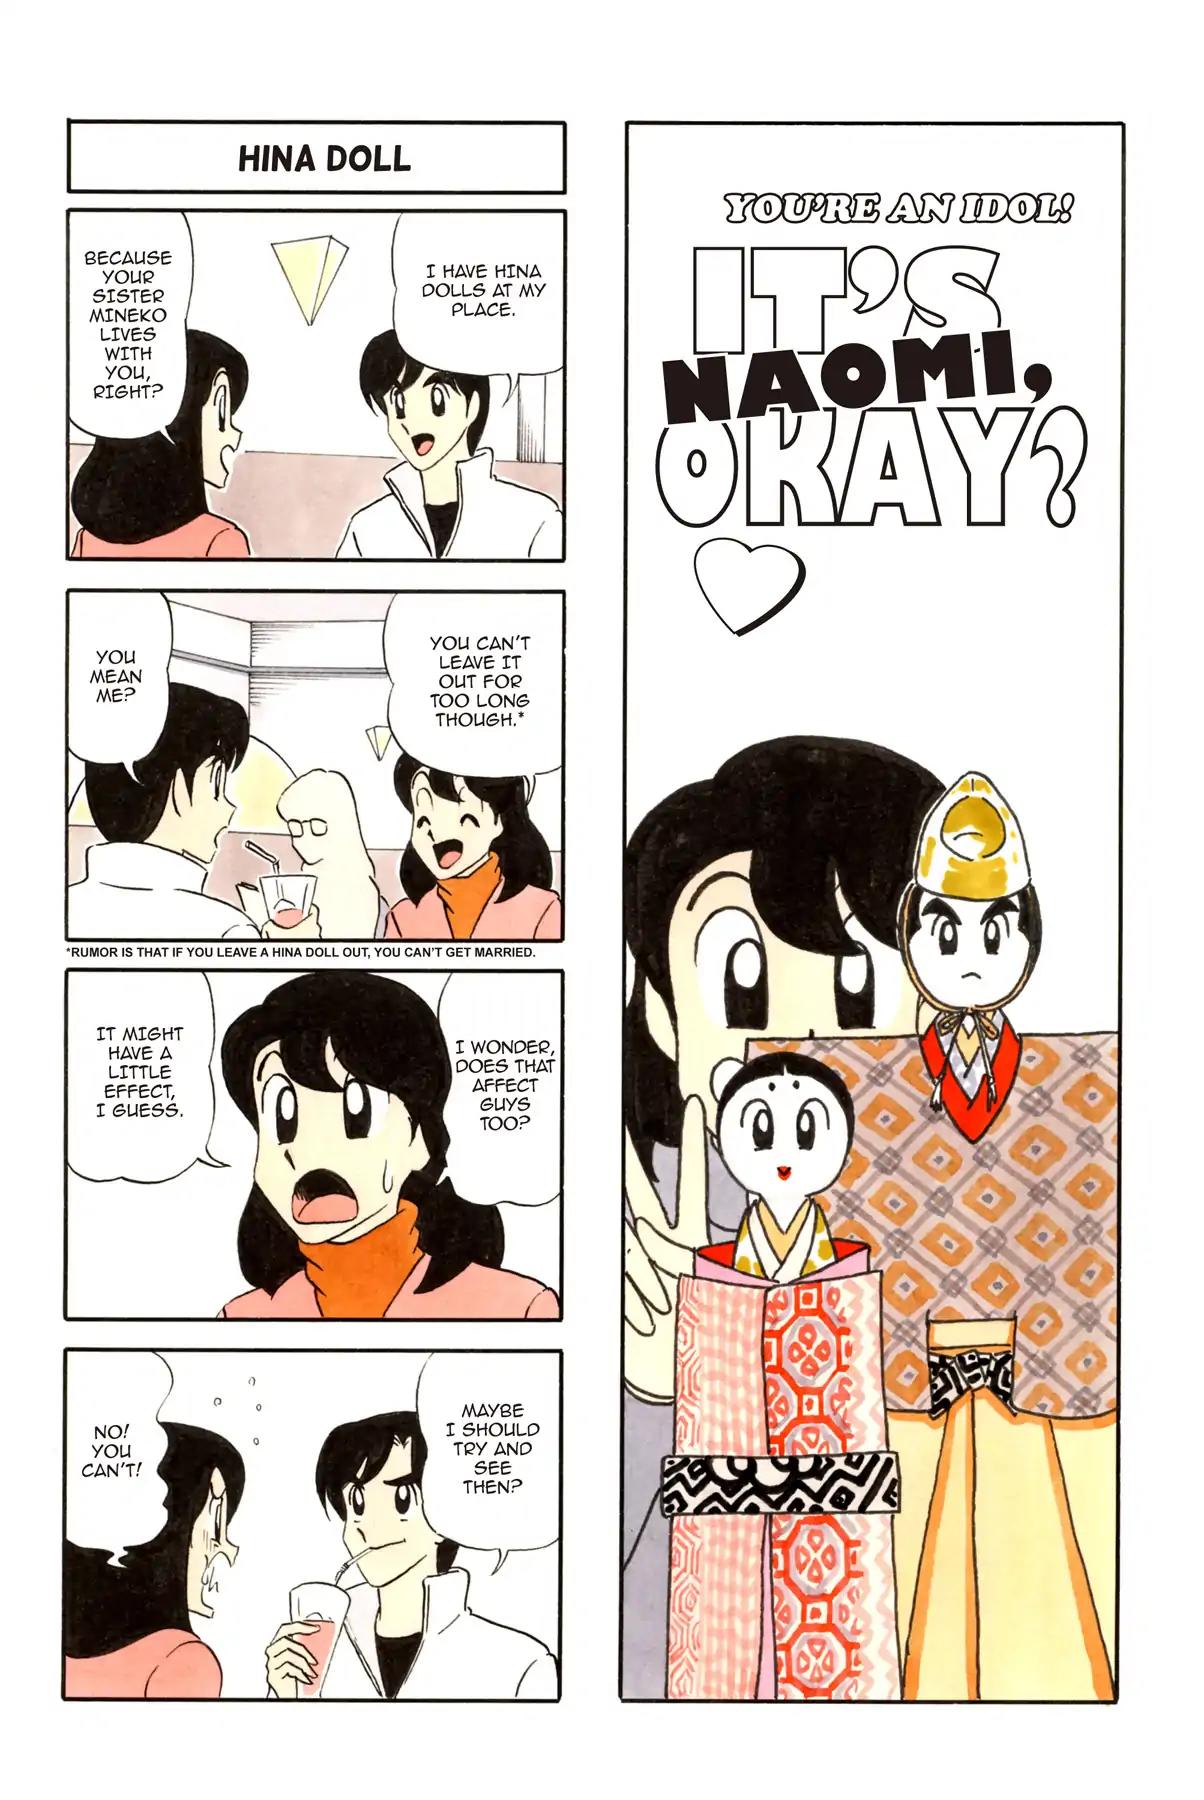 It's Naomi, Okay? After 16 Vol 1 Chapter 9